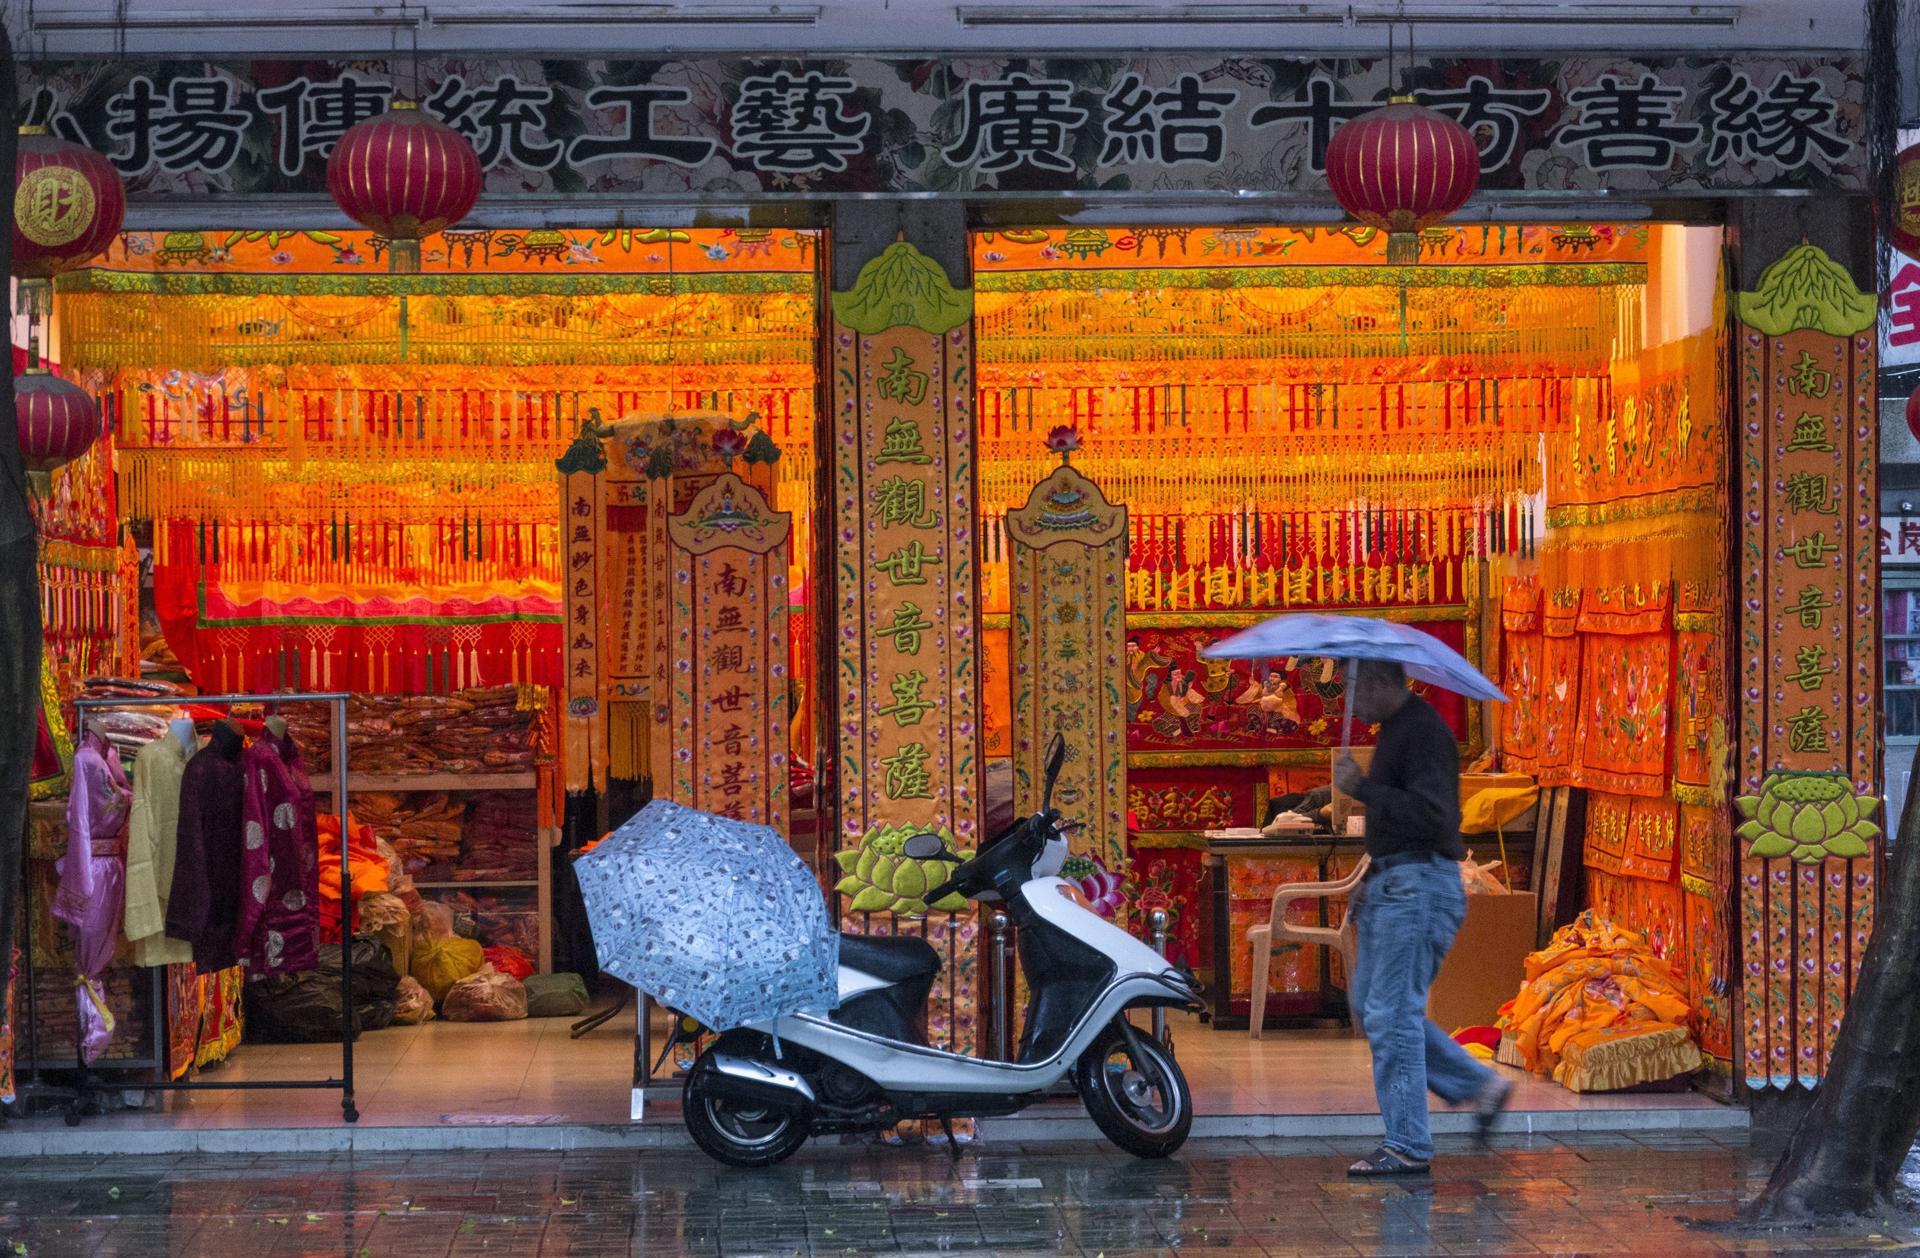 A pedestrian passes a shop specialising in embroidery in Chaozhou, Guangdong province, south China 29 November 2012. Chaozhou is home of one of EPA/ADRIAN BRADSHAW